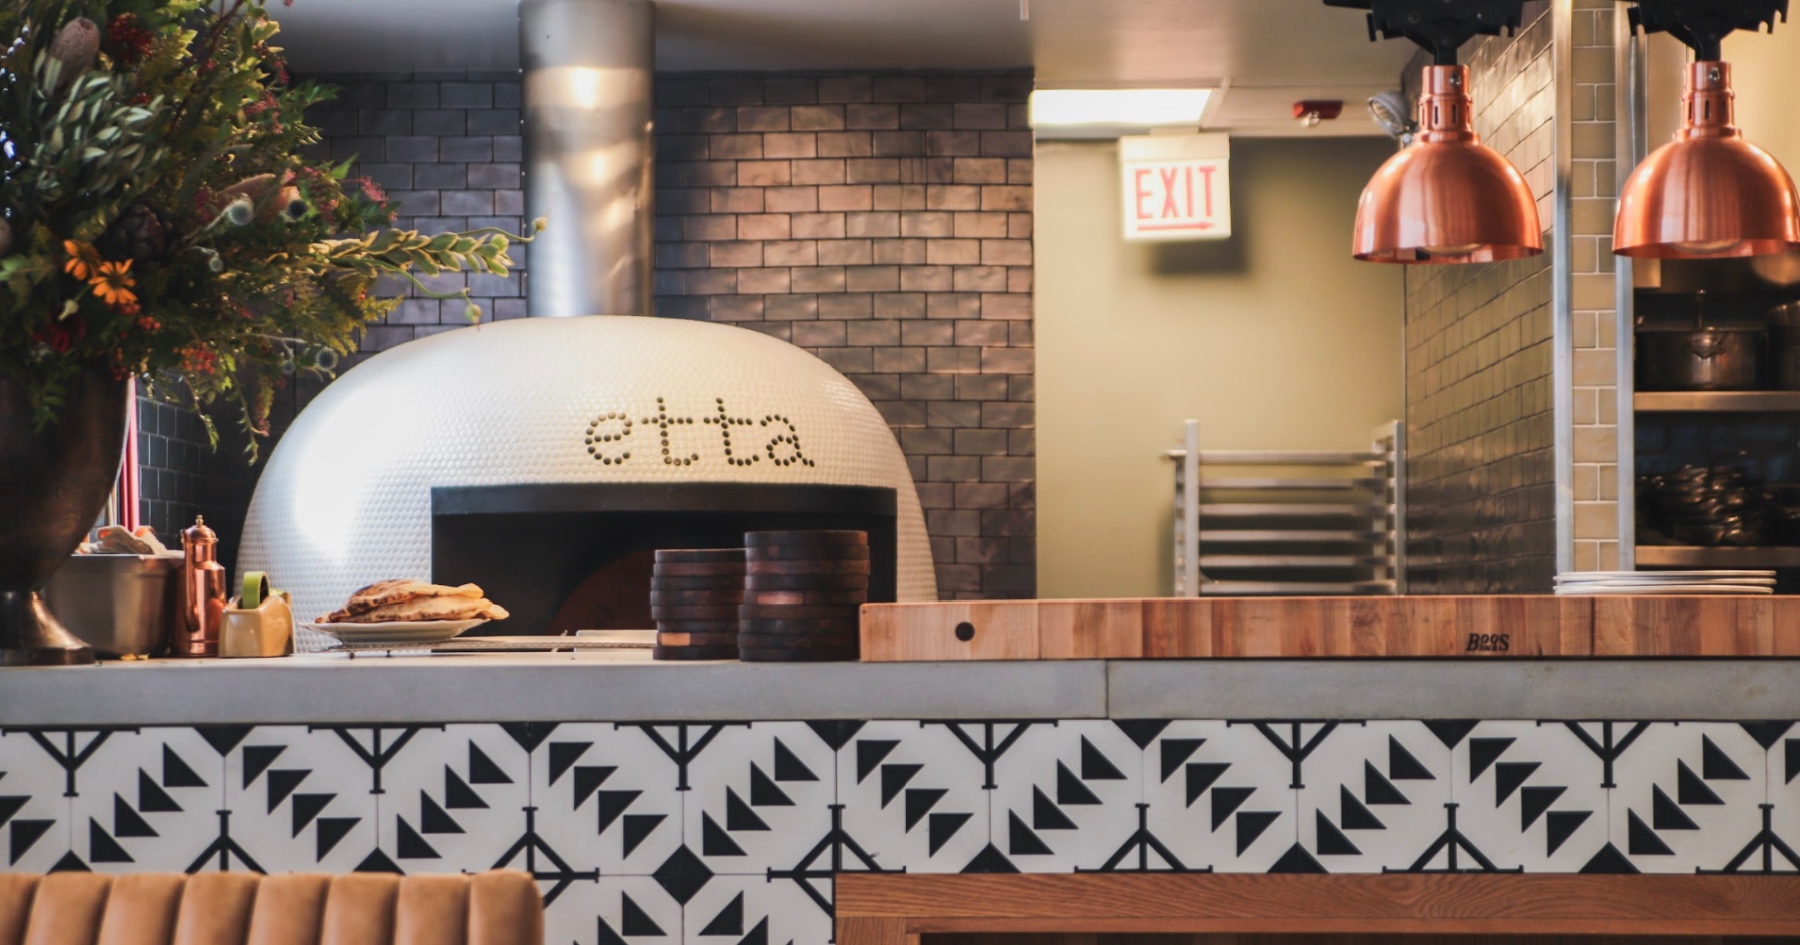   
																Restaurant tech firm InKind acquires Etta Collective out of bankruptcy 
															 